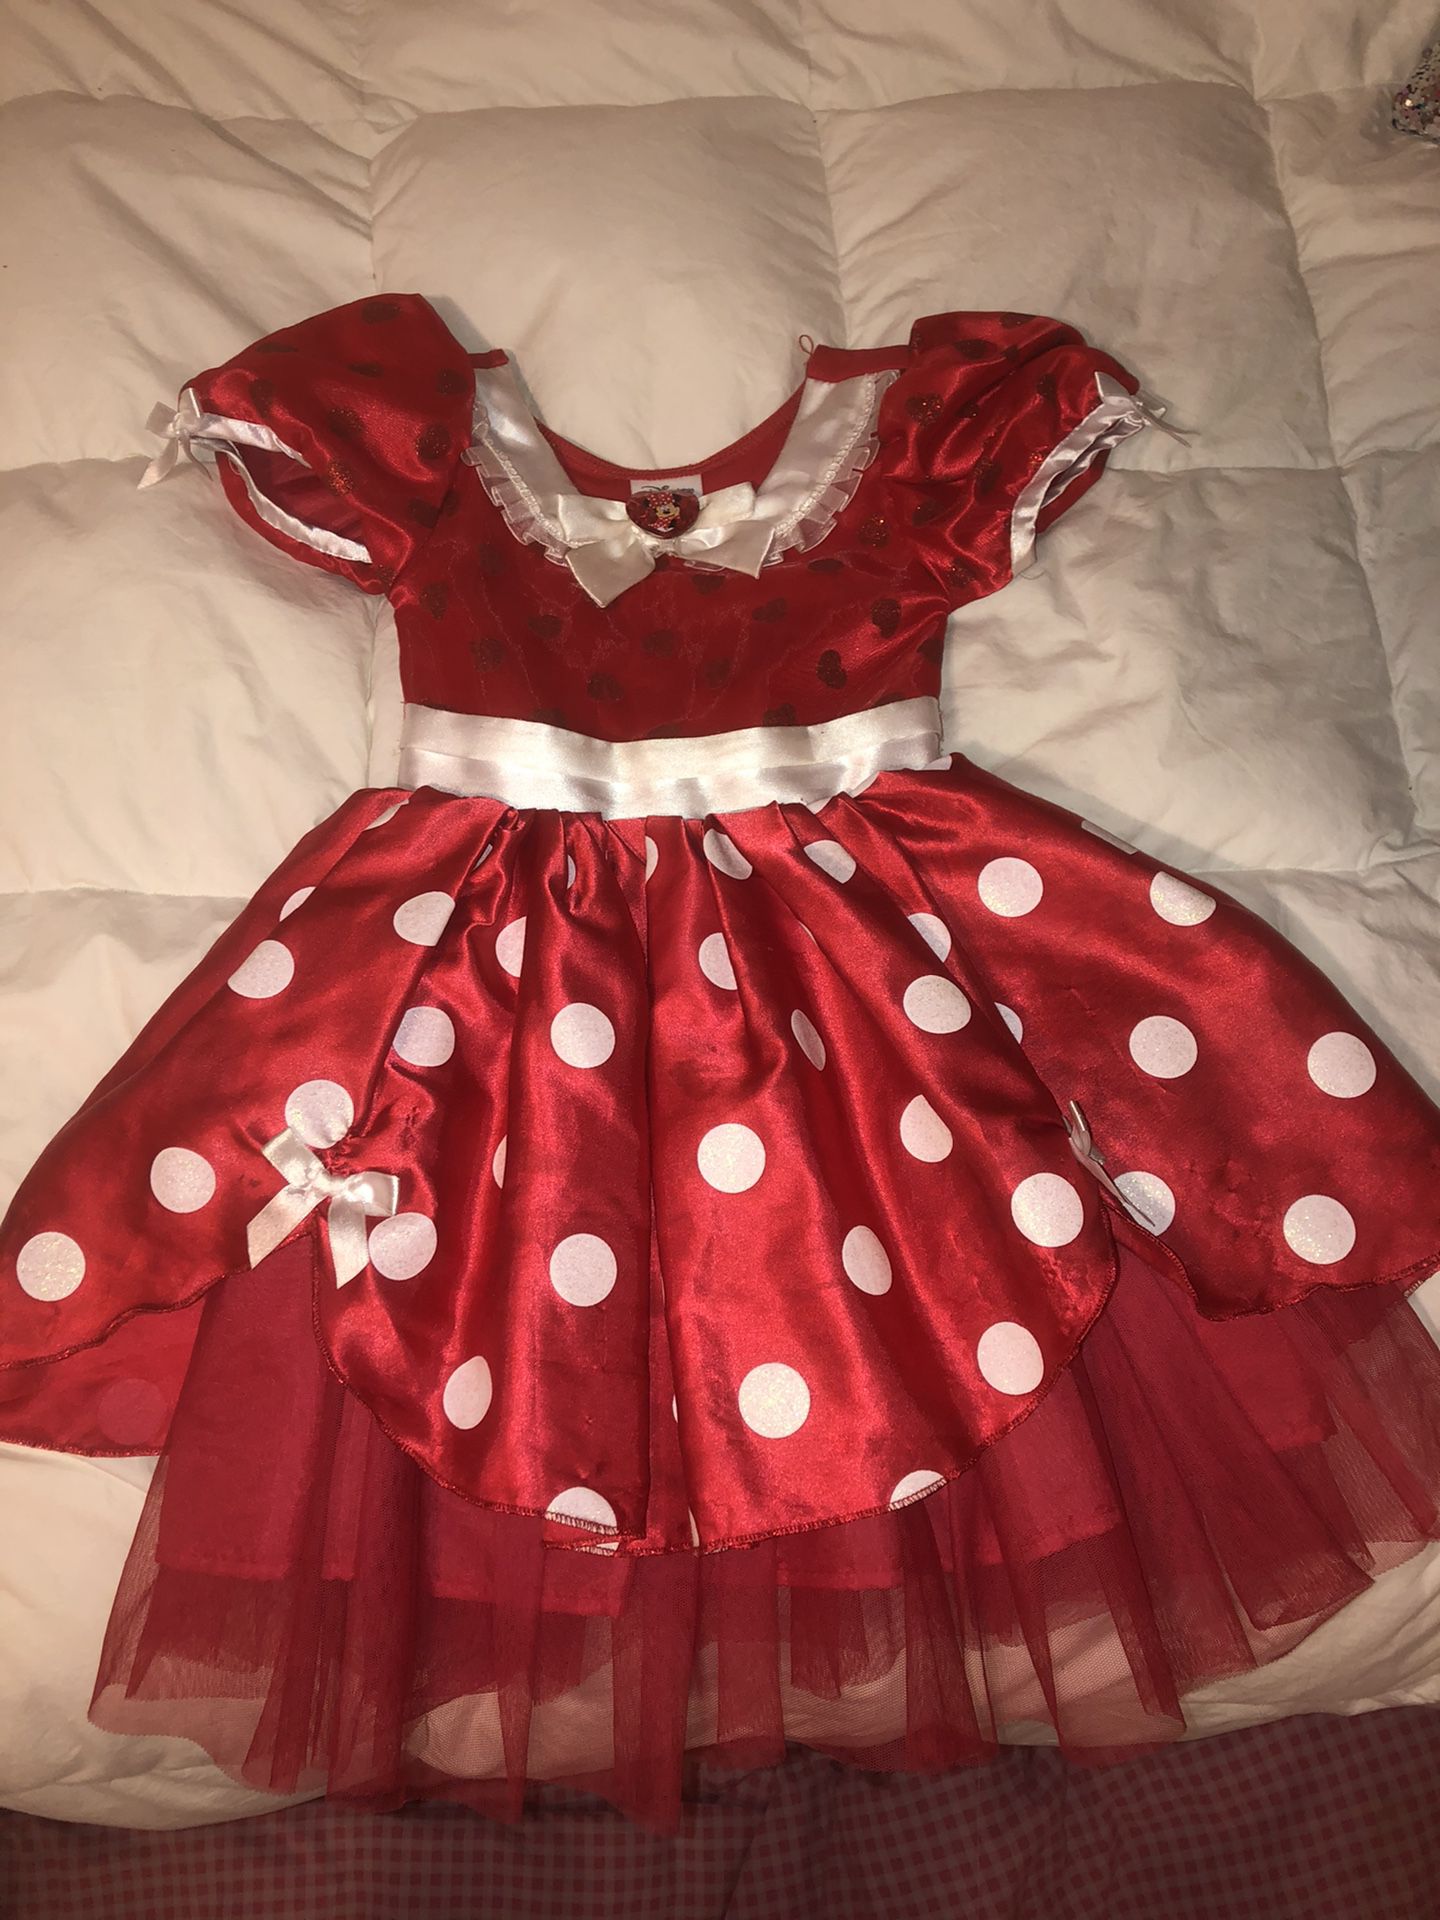 MINNIE MOUSE Costume From Disney Store Size 4